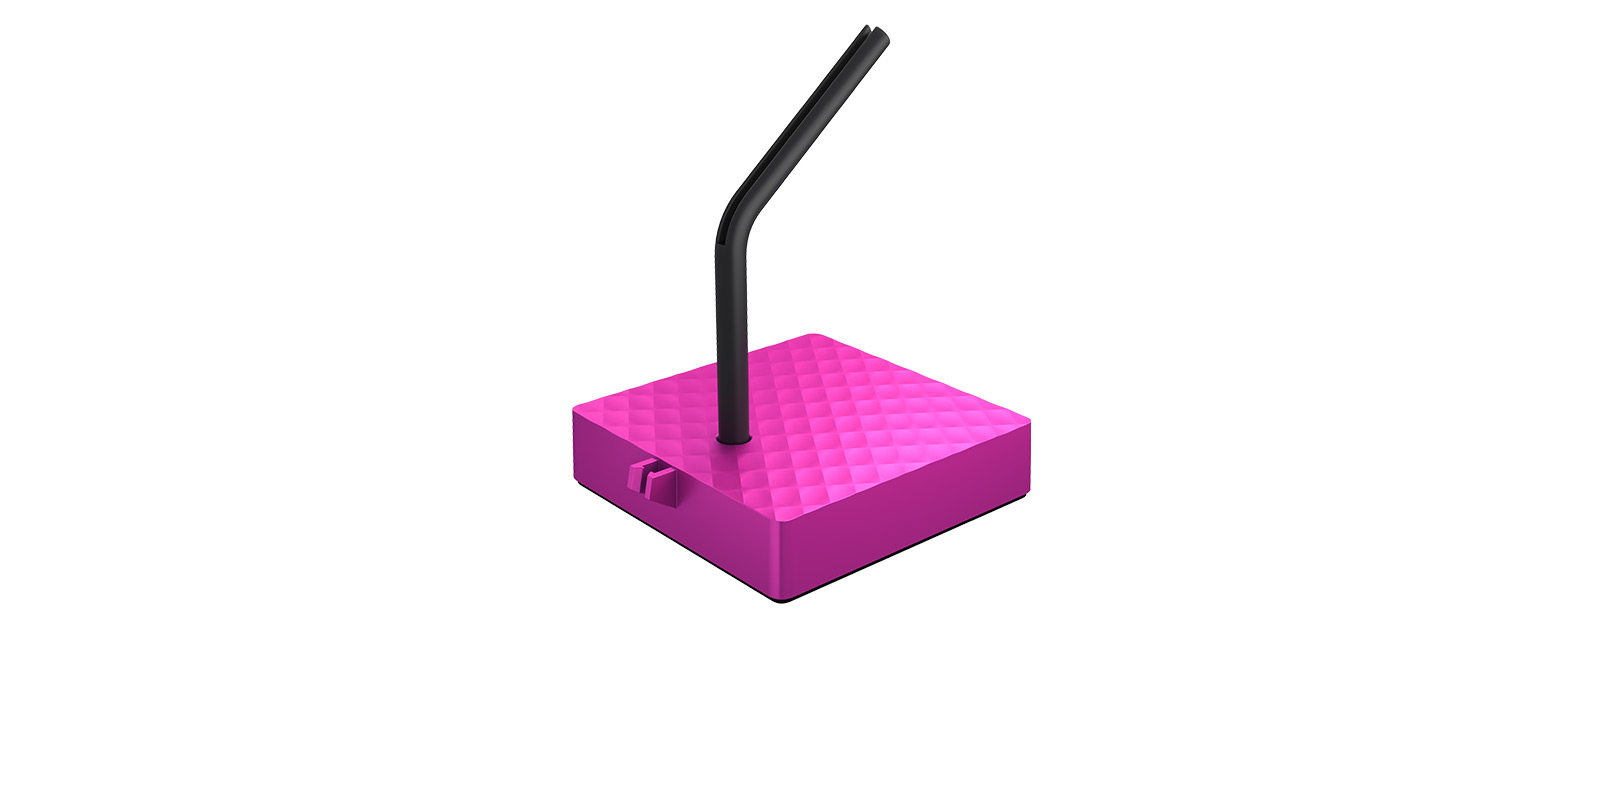 Xtrfy B4 Mouse bungee - pink